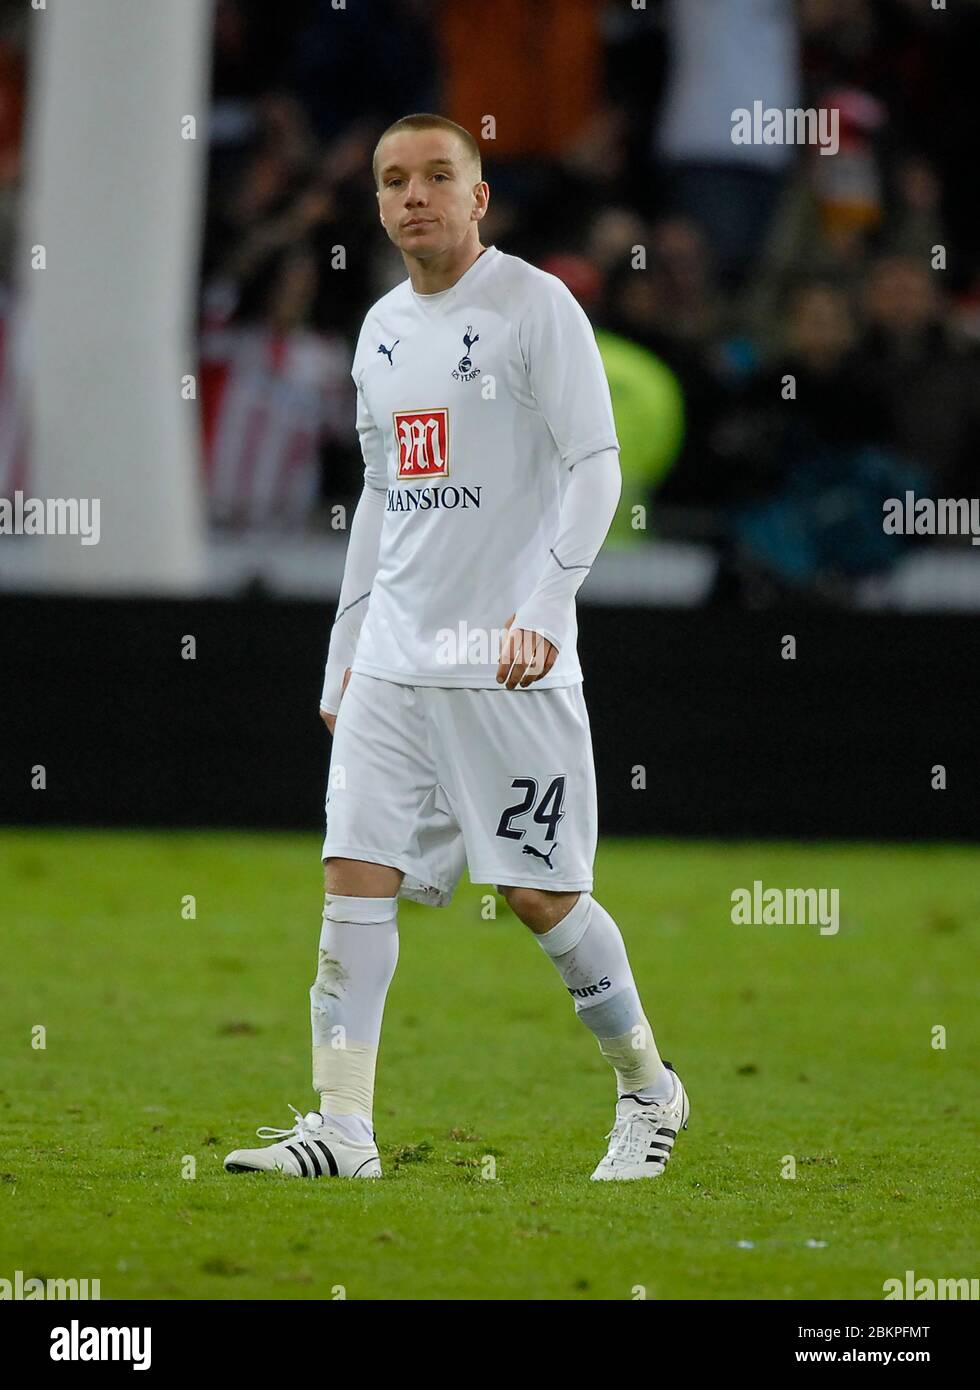 EINDHOVEN, NEDERLAND. MARCH 12: Jamie O'Hara of Tottenham Hotspur During UEFA Cup Round of 16 Second Leg between PSV Eindhoven and Tottenham Hotspur a Stock Photo